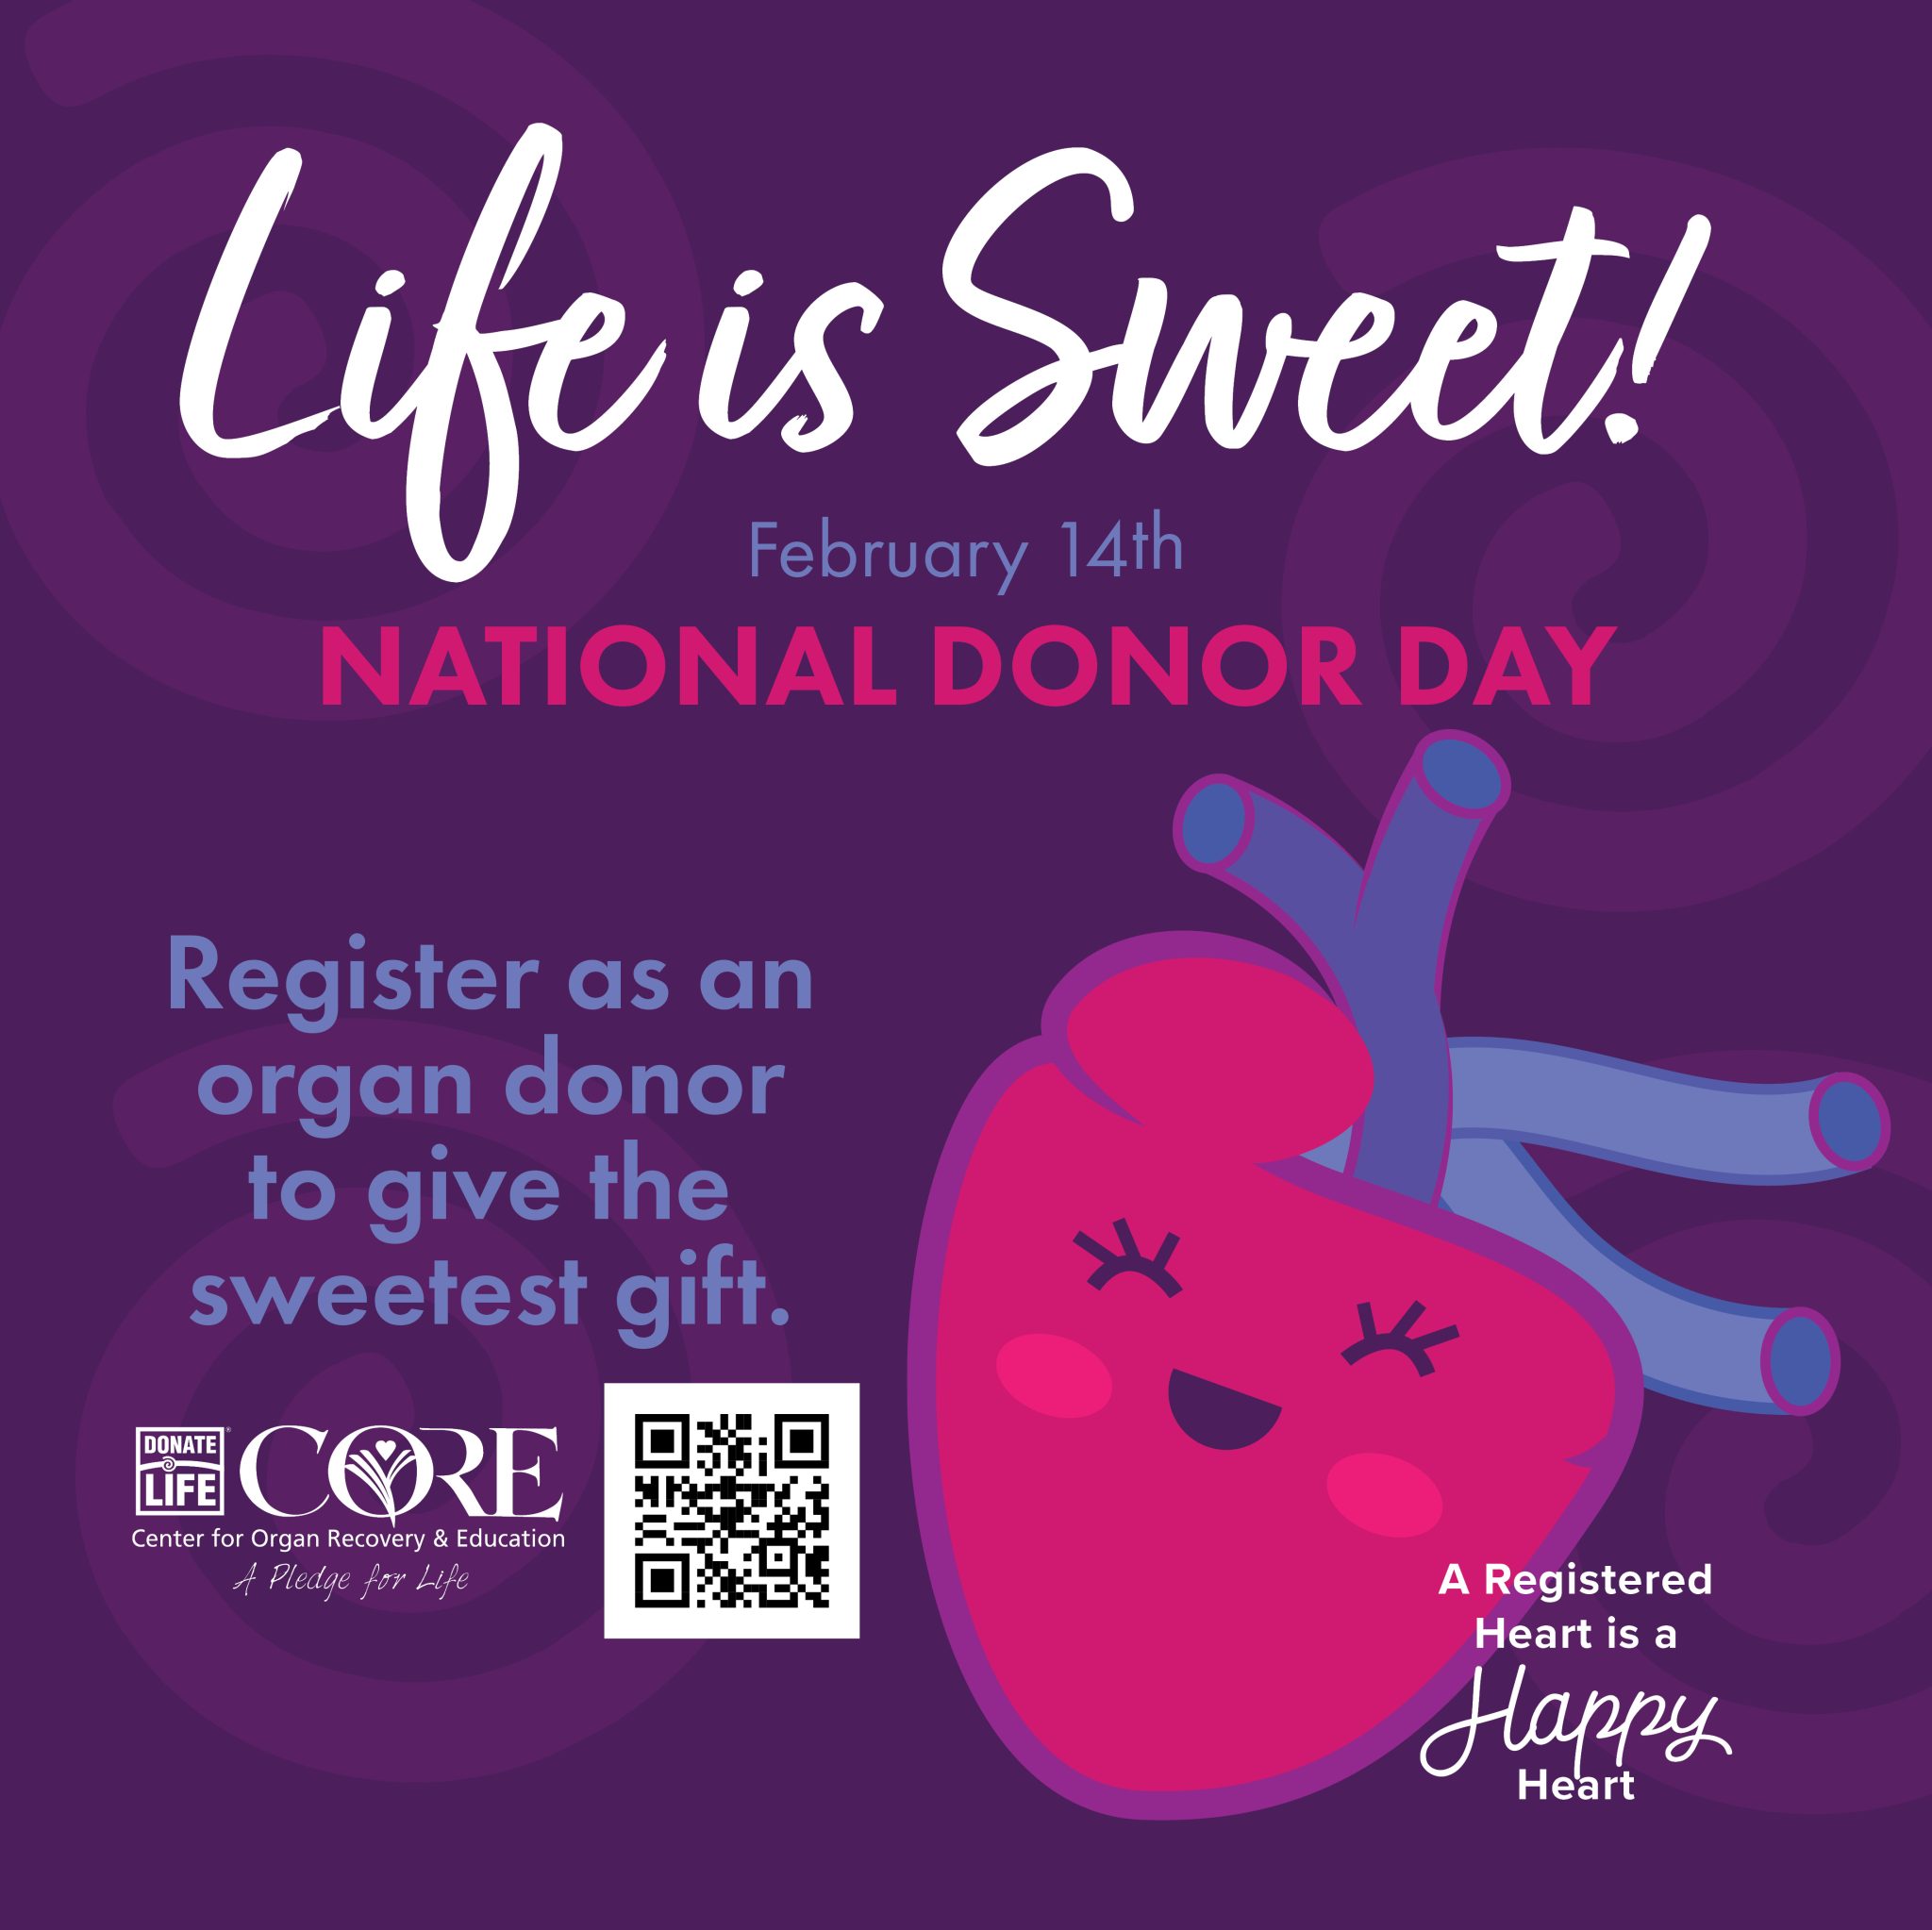 National Donor Day Toolkit CORE Center for Organ Recovery & Education